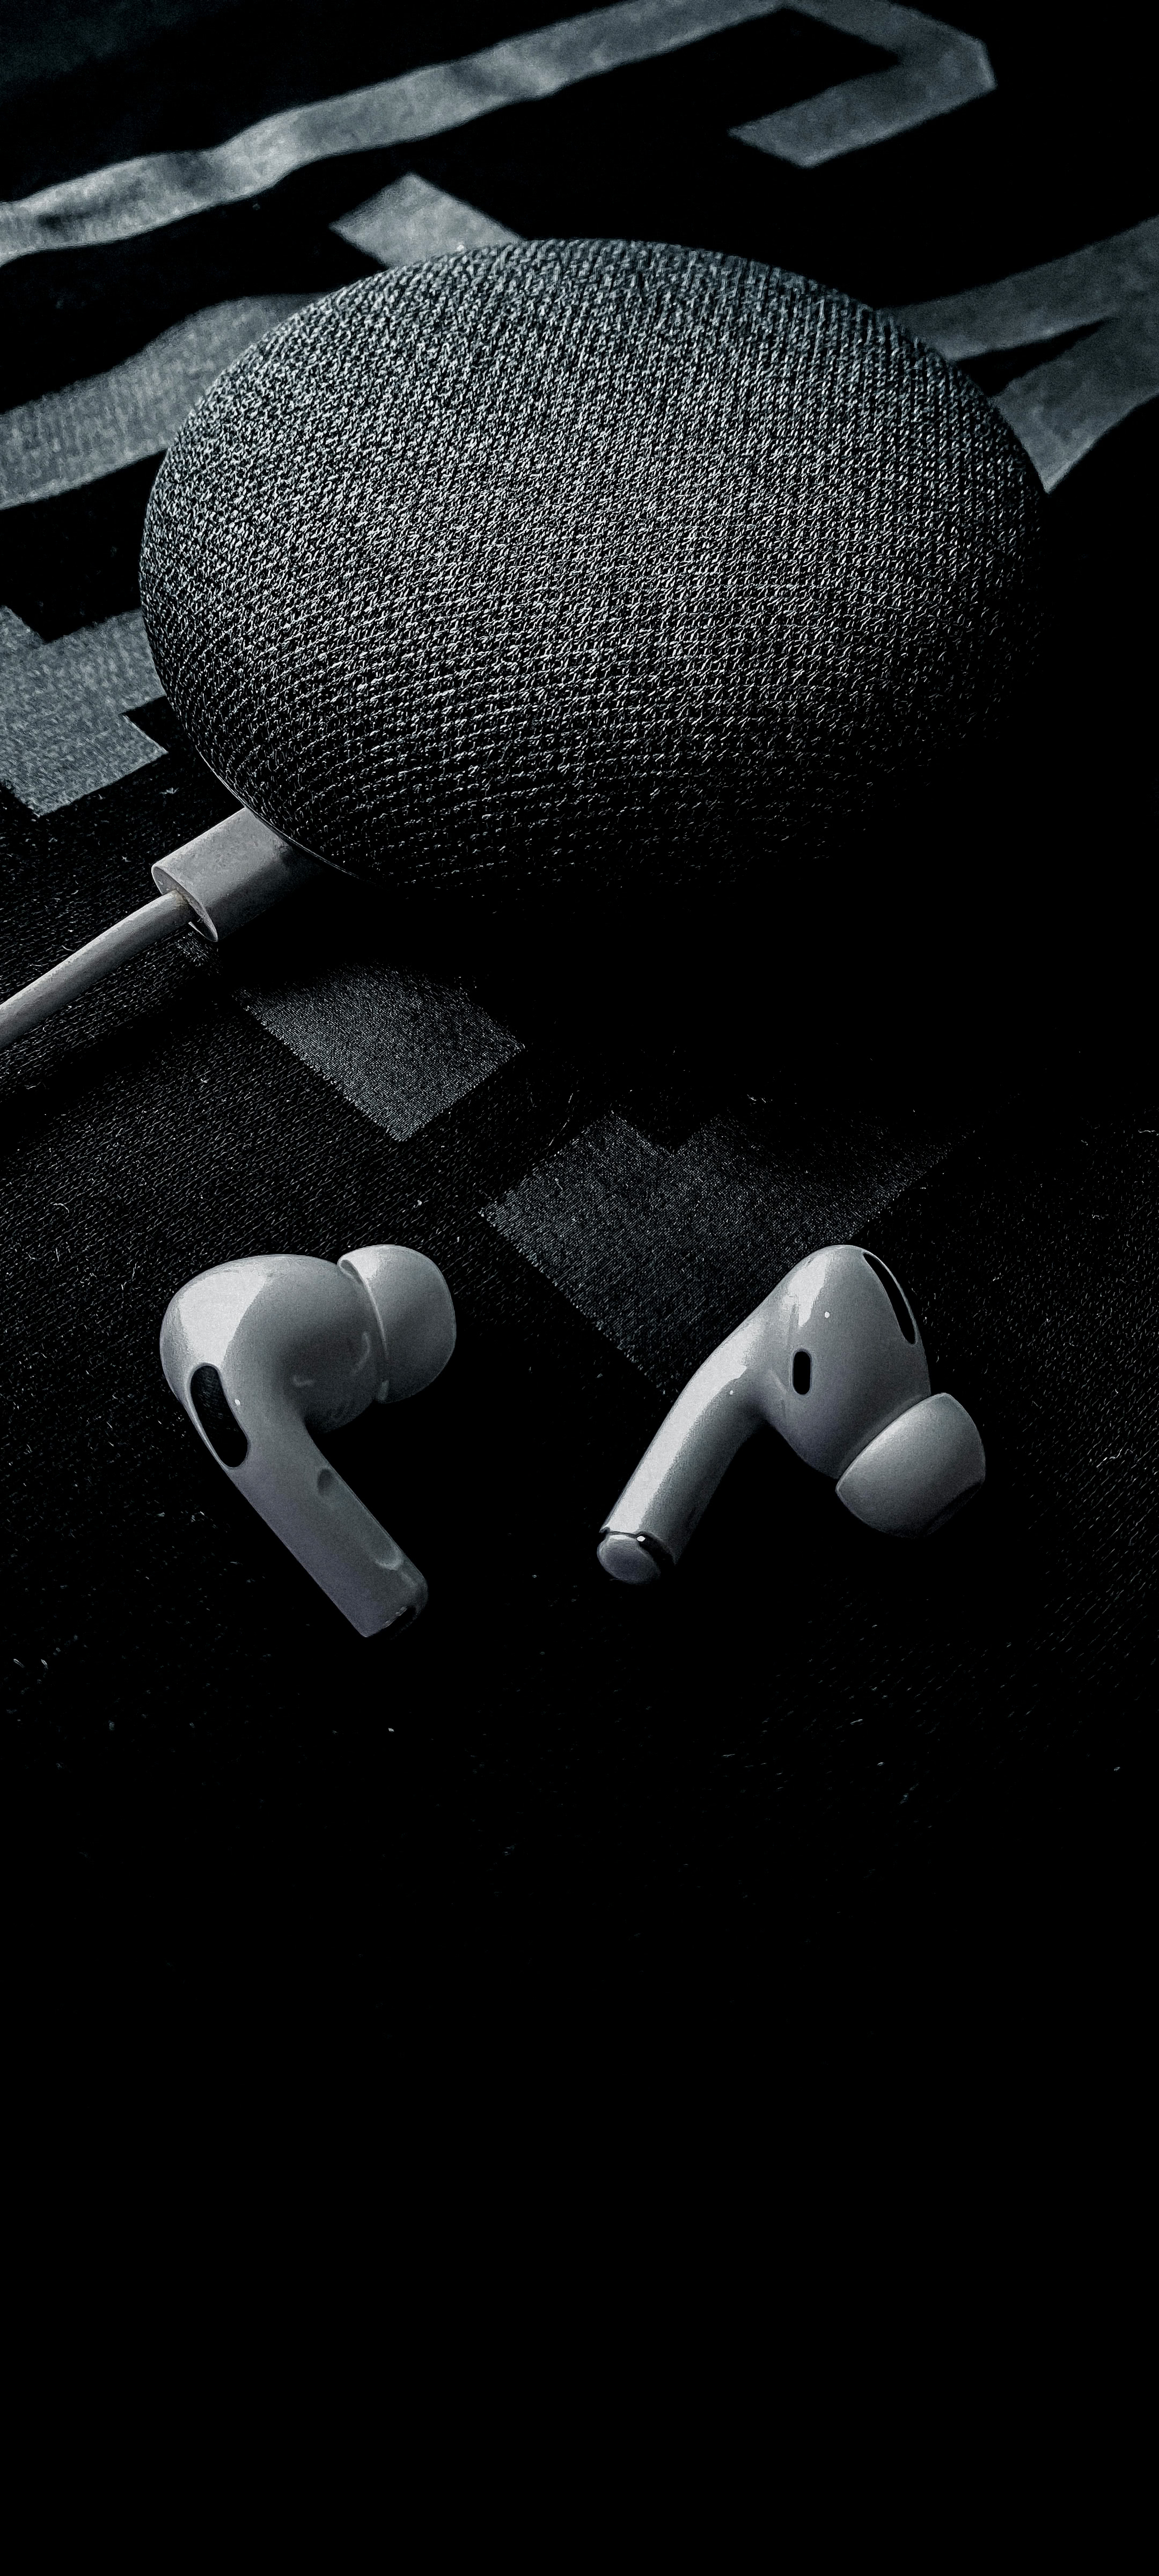 Wallpaper Airpods Pro Bluetooth Apples Speaker Wireless Background   Download Free Image